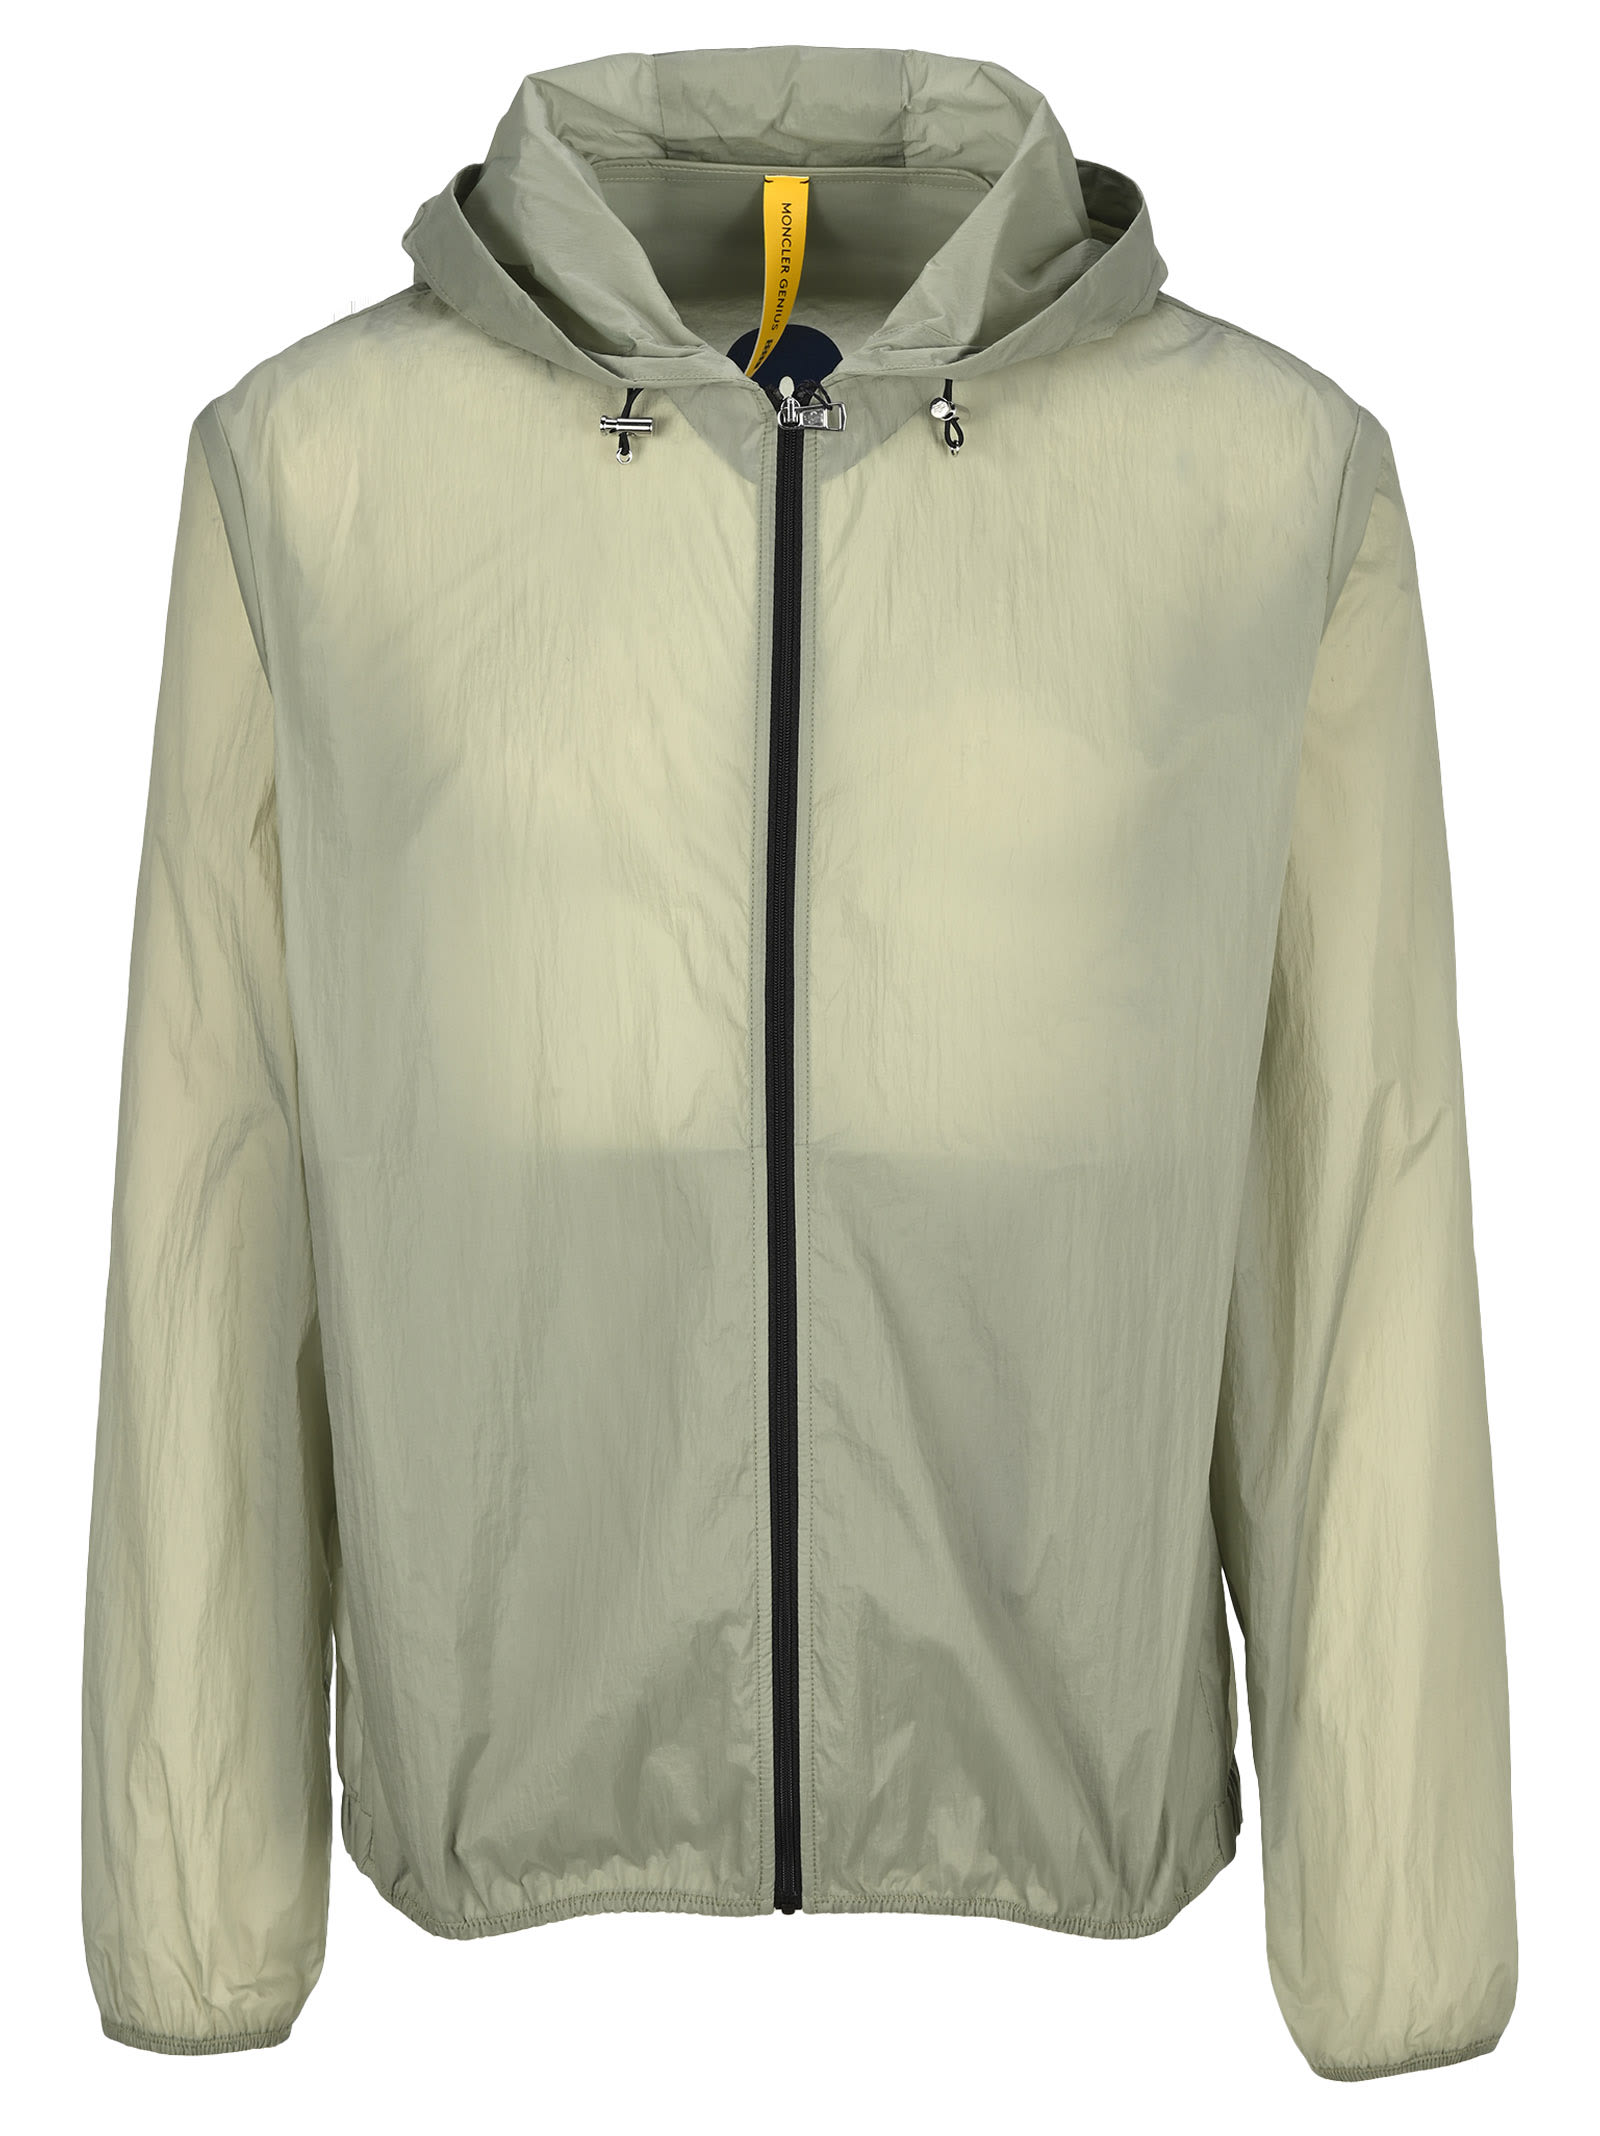 Moncler Genius Moncler By Craig Green Oxybelis Jacket In Light Green